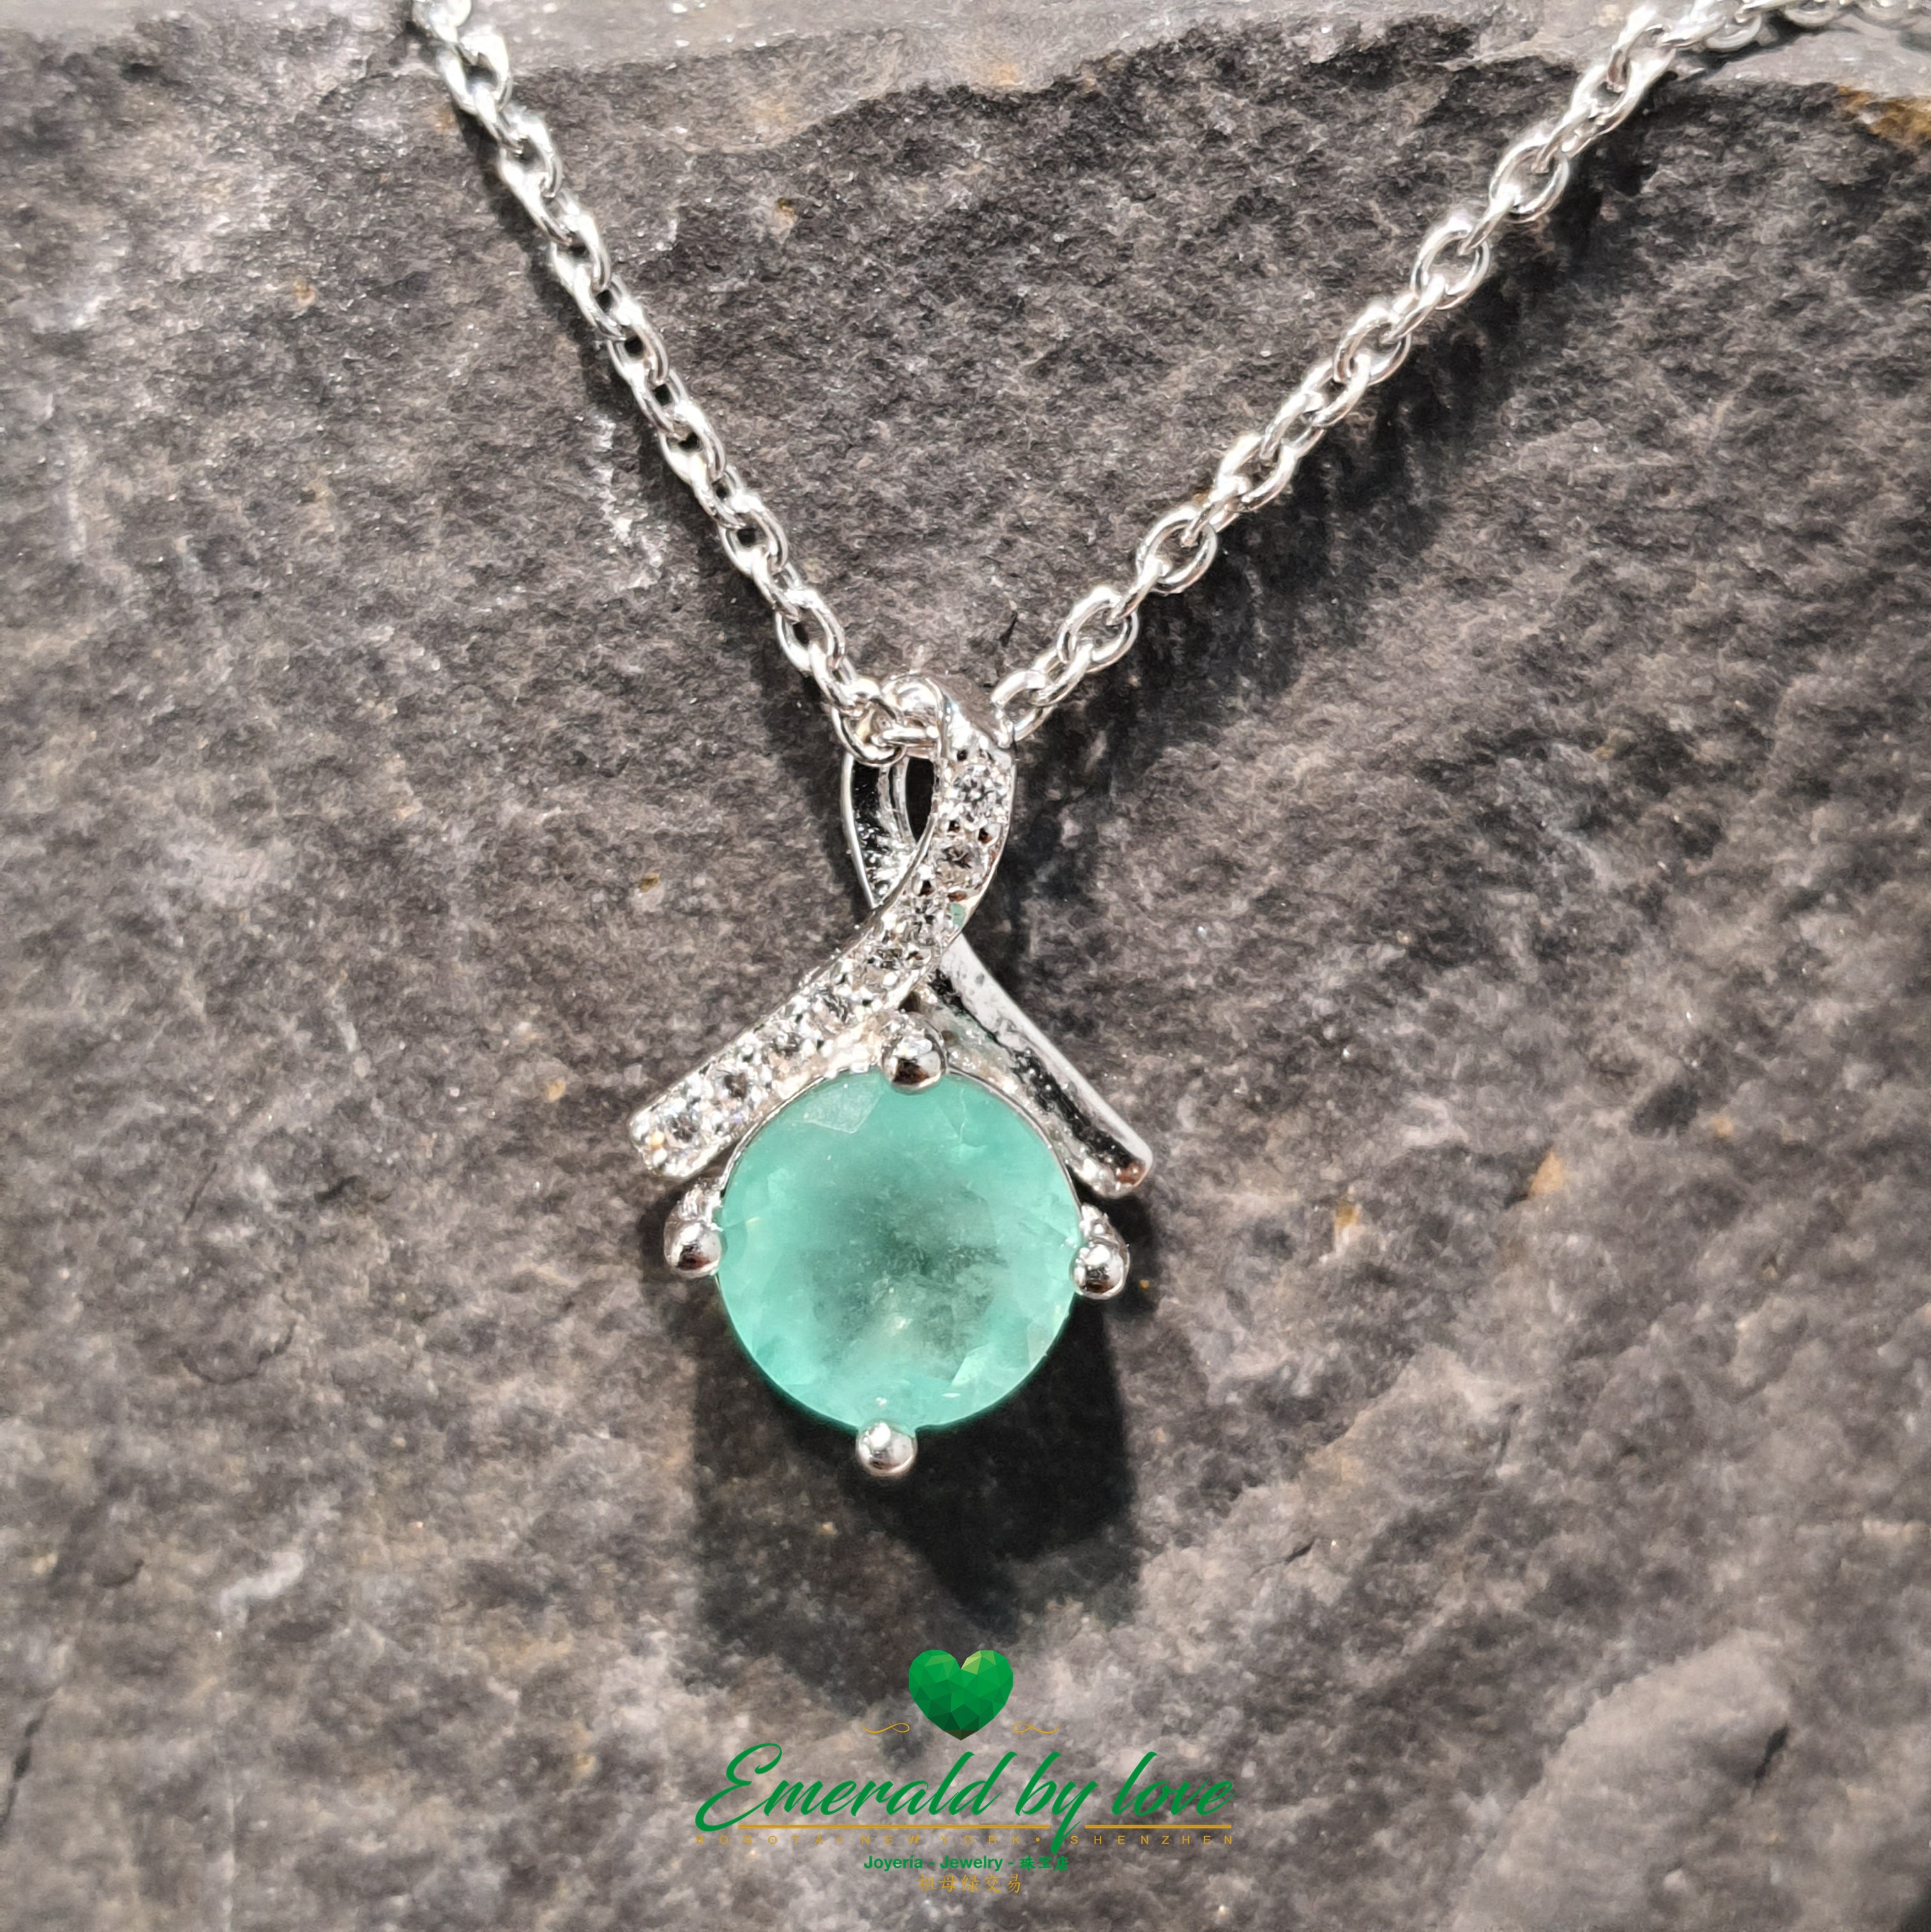 Emerald Crystal Pendant with Petite Bow of Cubic Zirconia in Sterling Silver